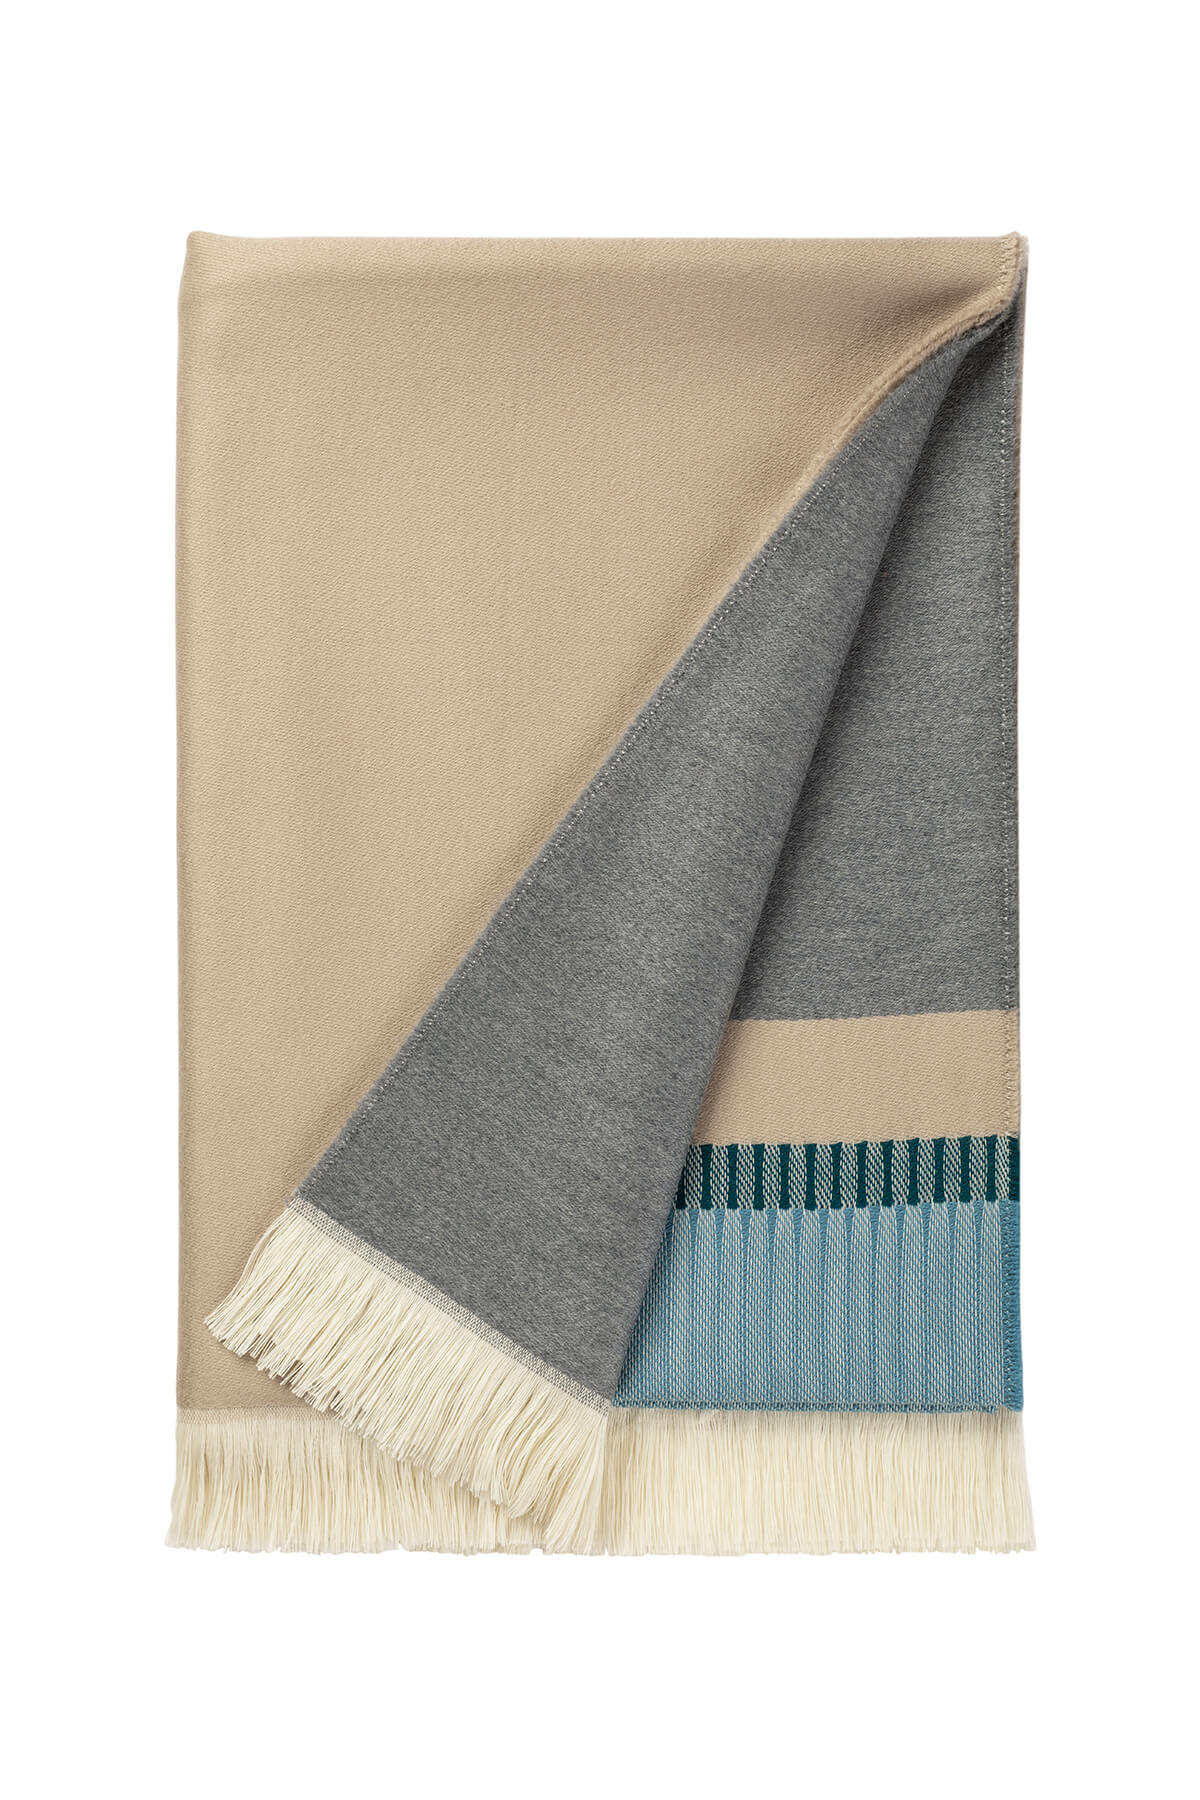 Johnstons of Elgin Bold Stripe Merino Blend Throw in Teal on a white background WD000257RU7289ONE